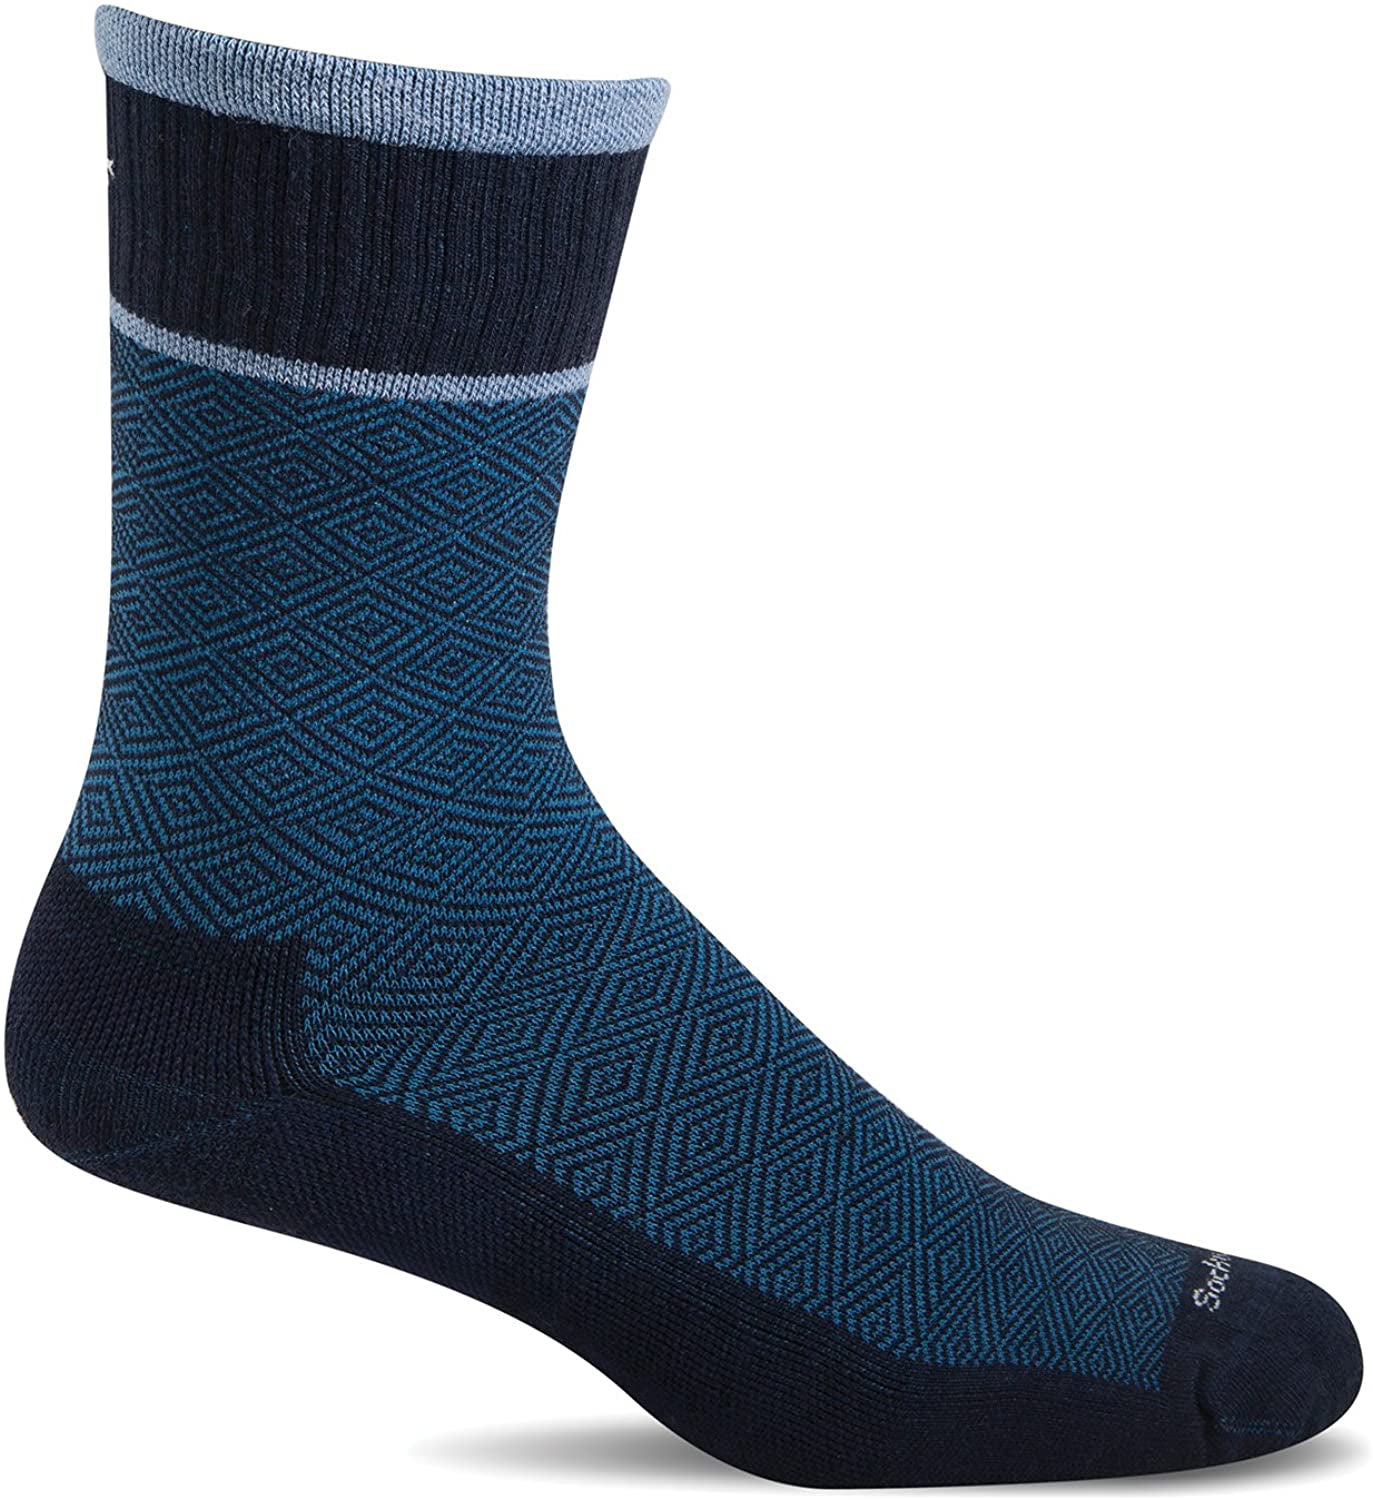 Sockwell Men's Plantar Cush Crew Sock in Navy color from the side